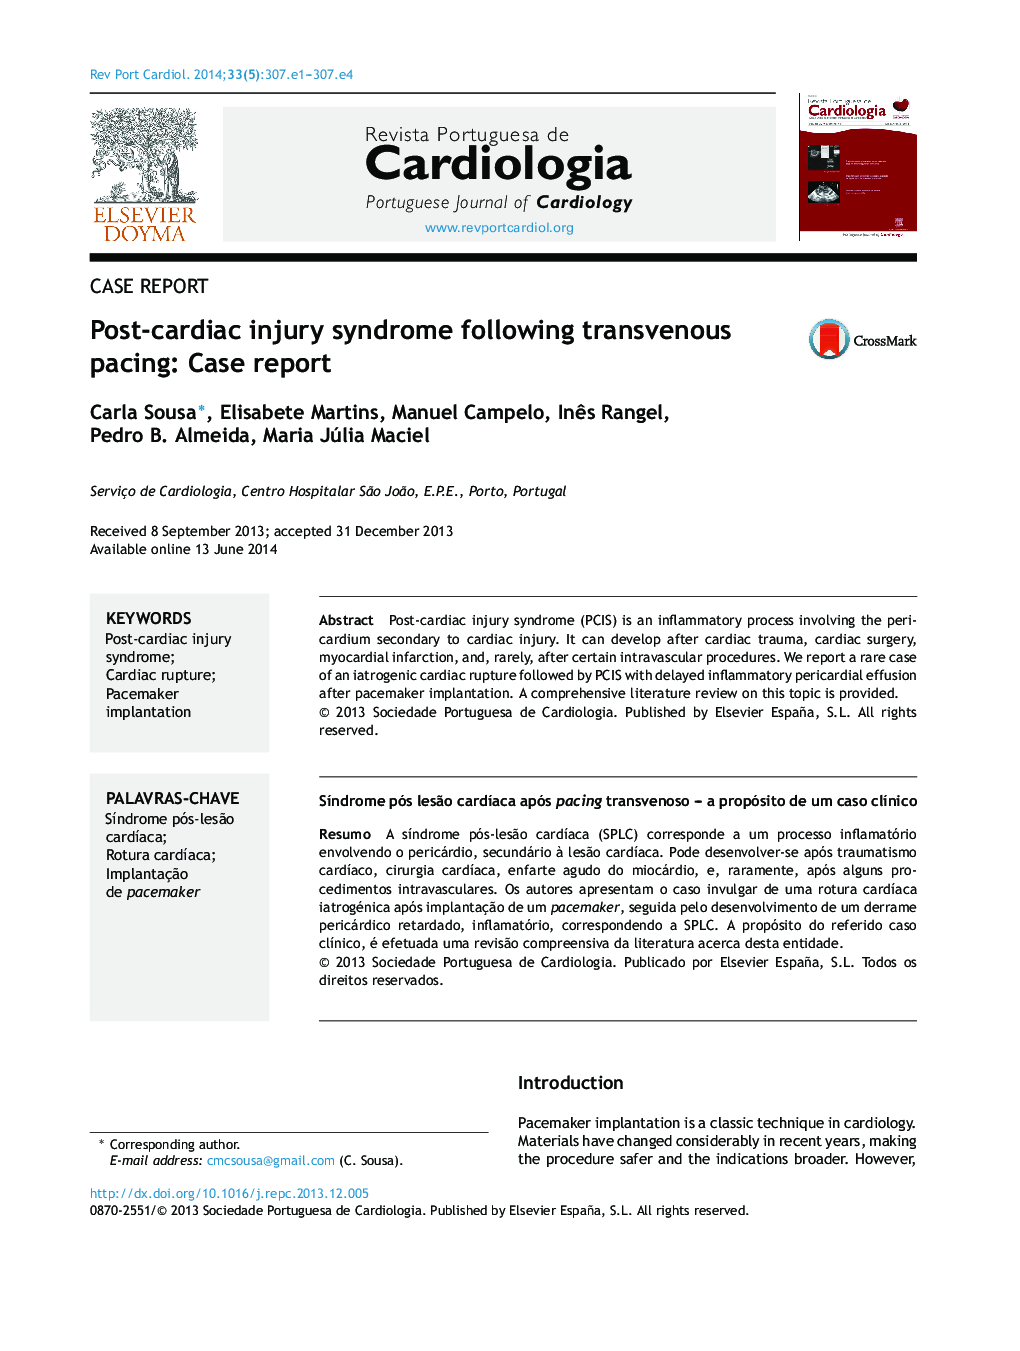 Post-cardiac injury syndrome following transvenous pacing: Case report